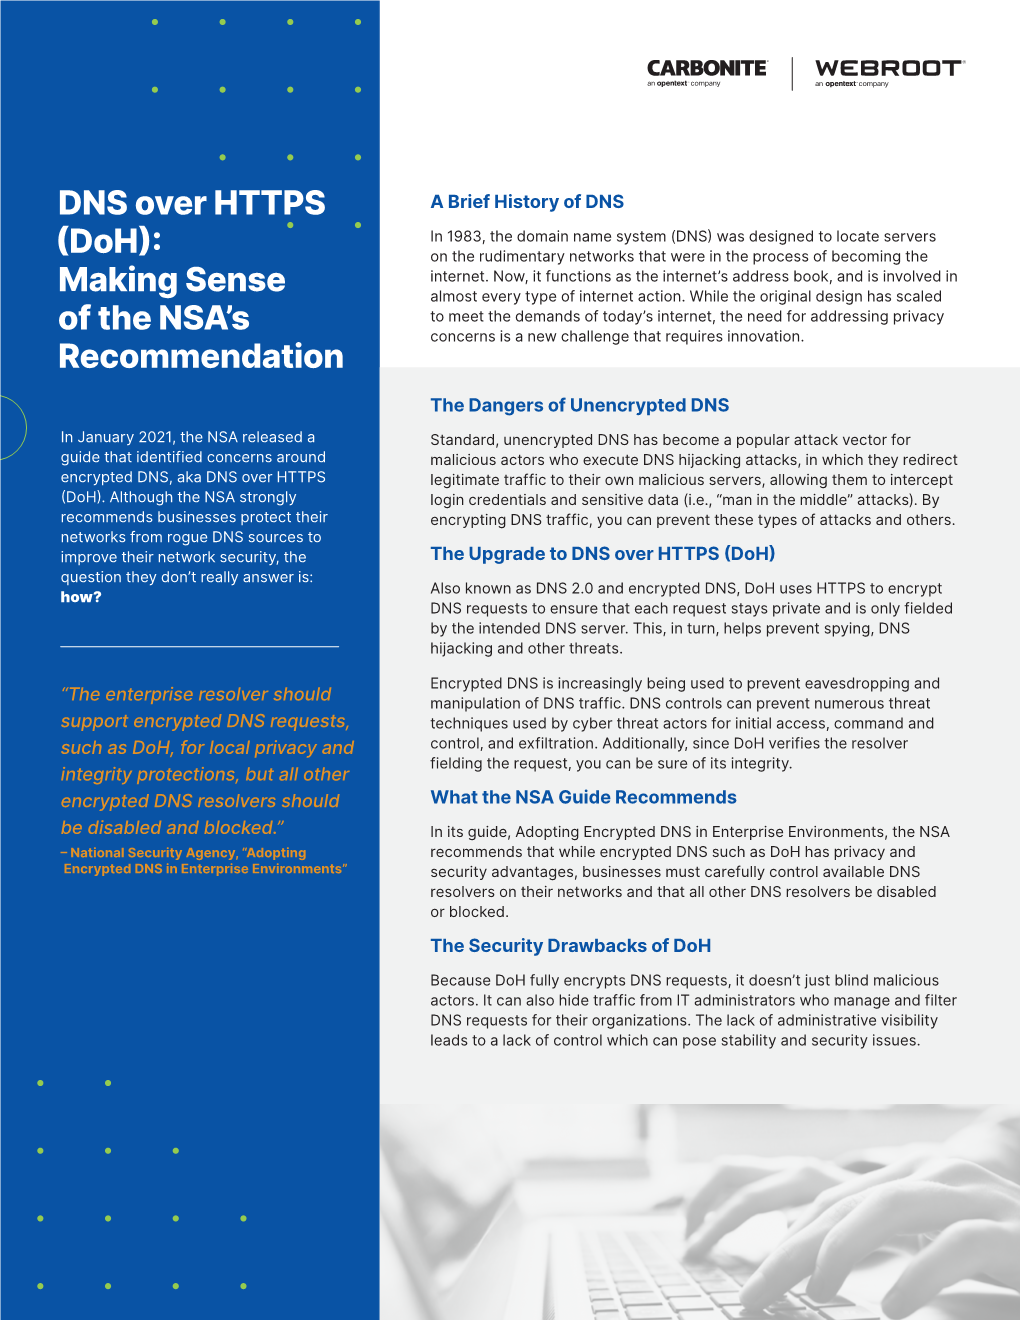 DNS Over HTTPS (Doh): Making Sense of the NSA's Recommendation